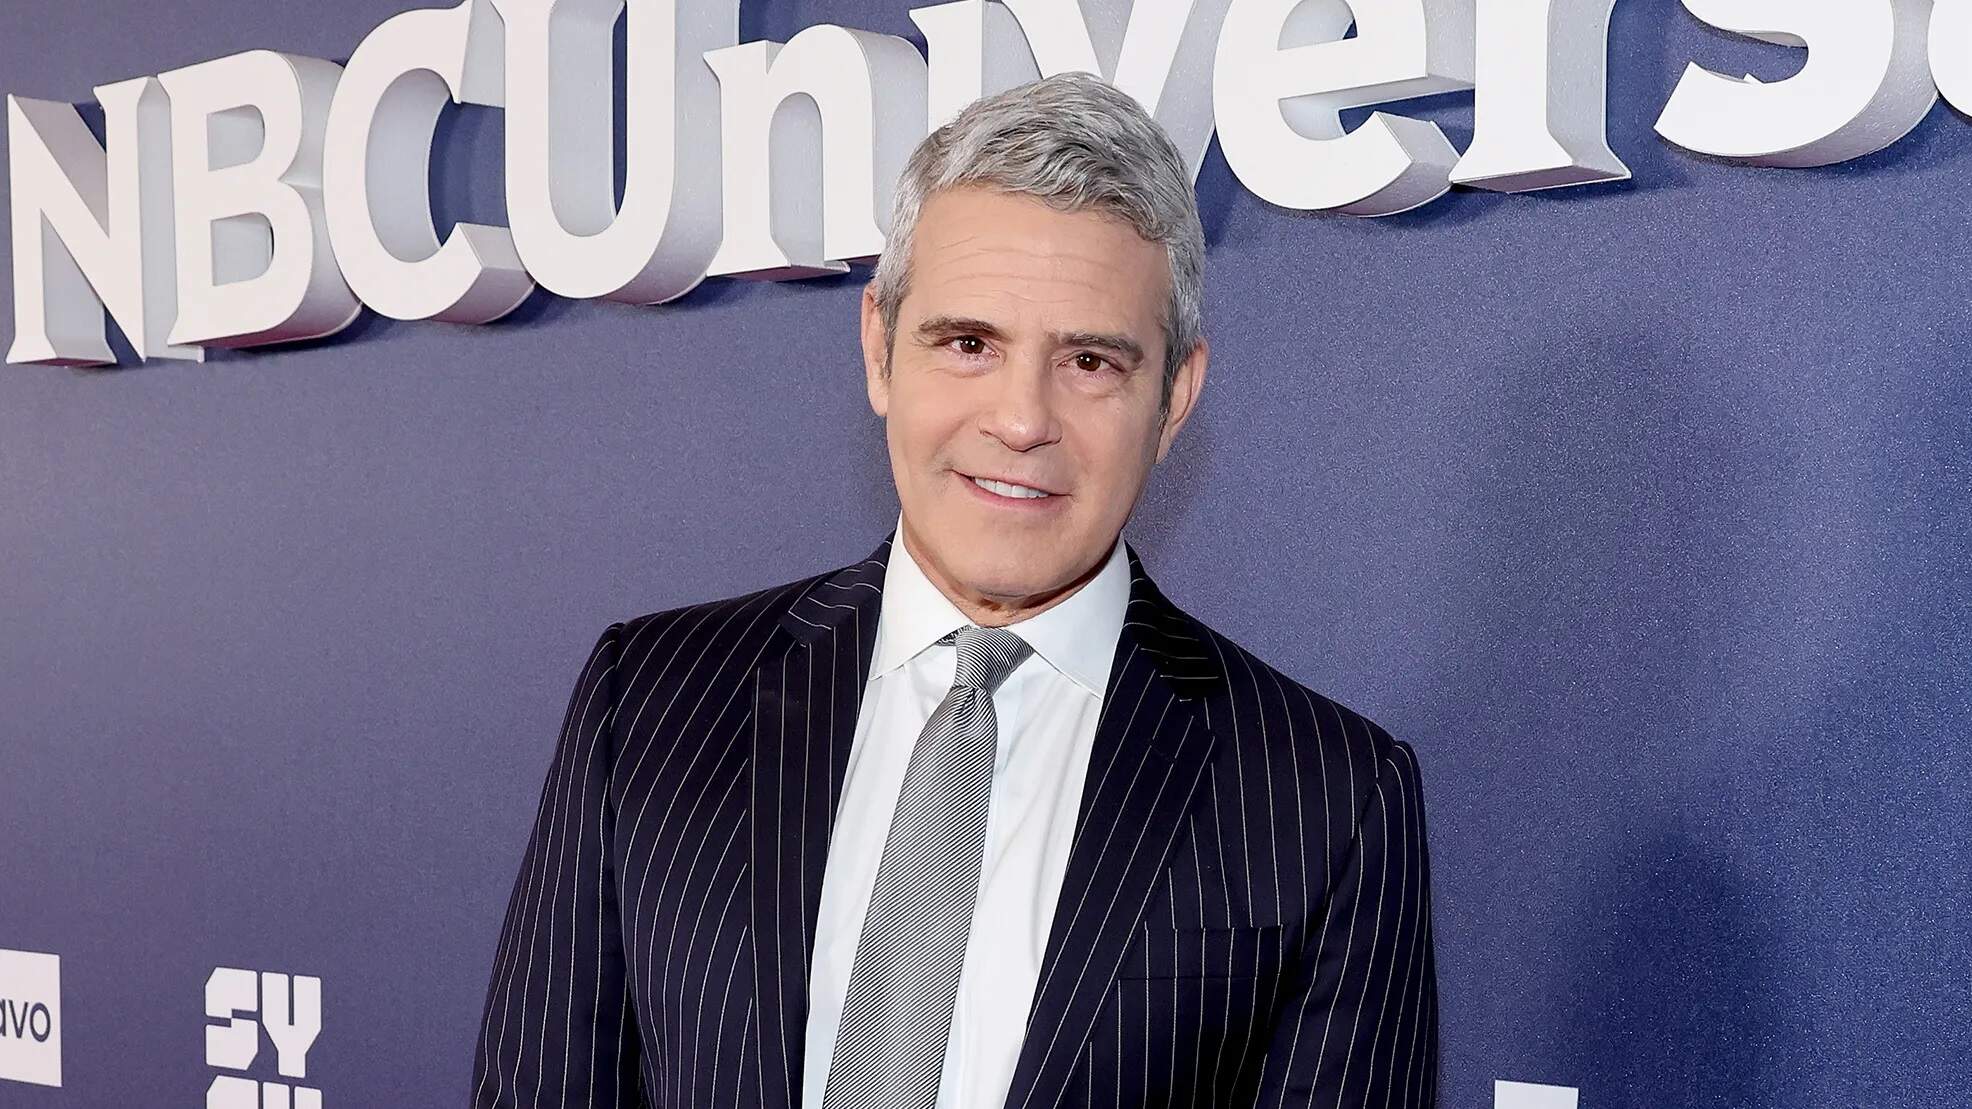 Real Housewives Stars Defend Andy Cohen Against Allegations